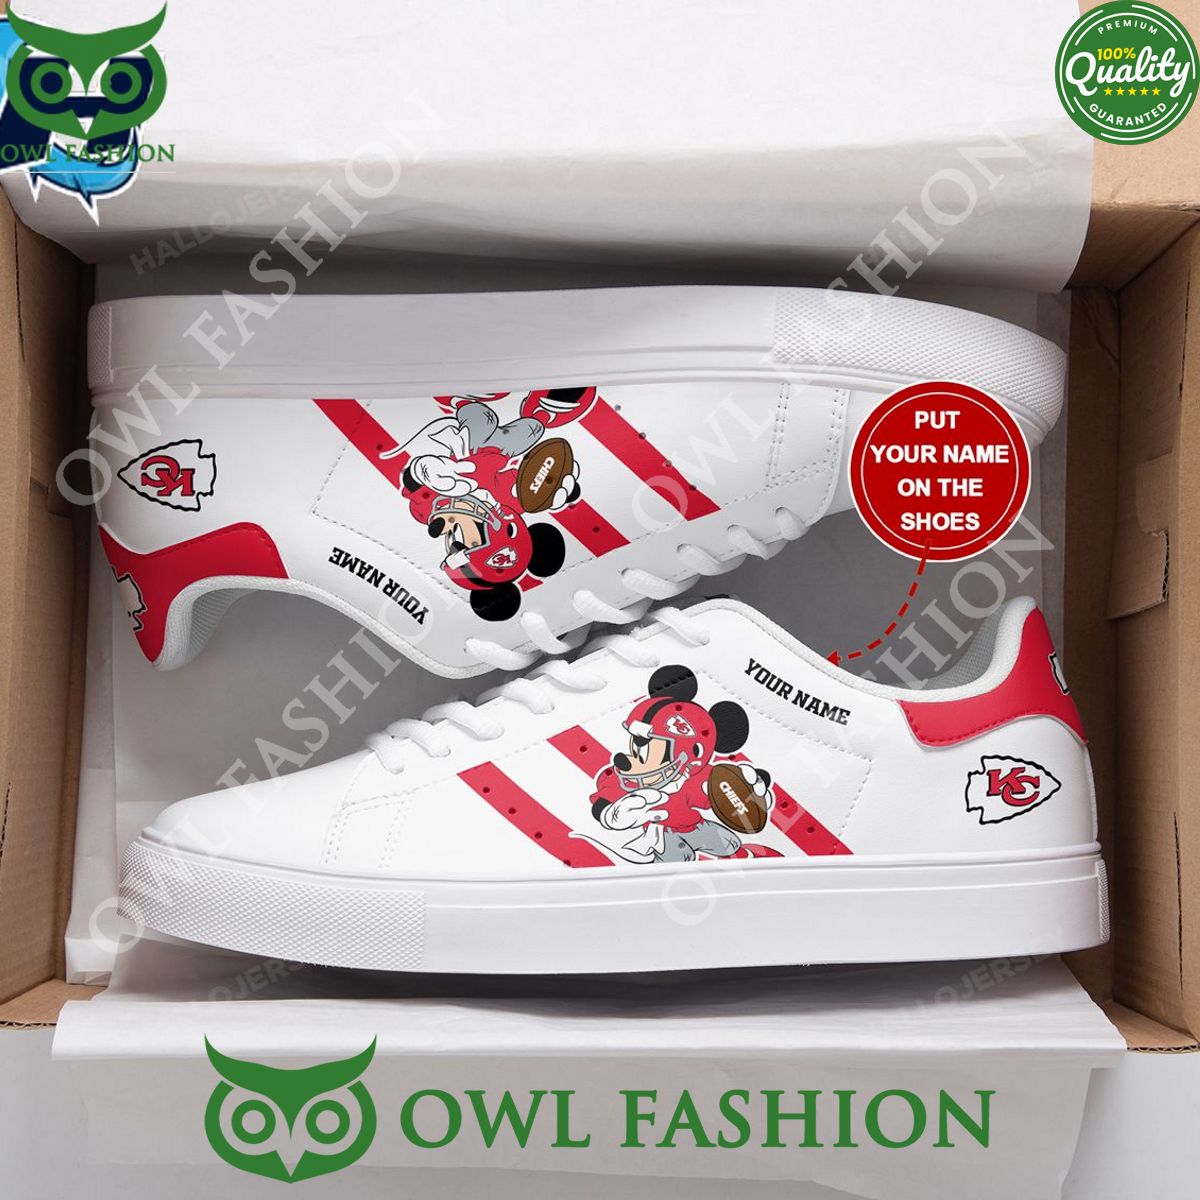 custom chiefs mickey stan smith shoes nfl personalized football gifts 1 n69M8.jpg